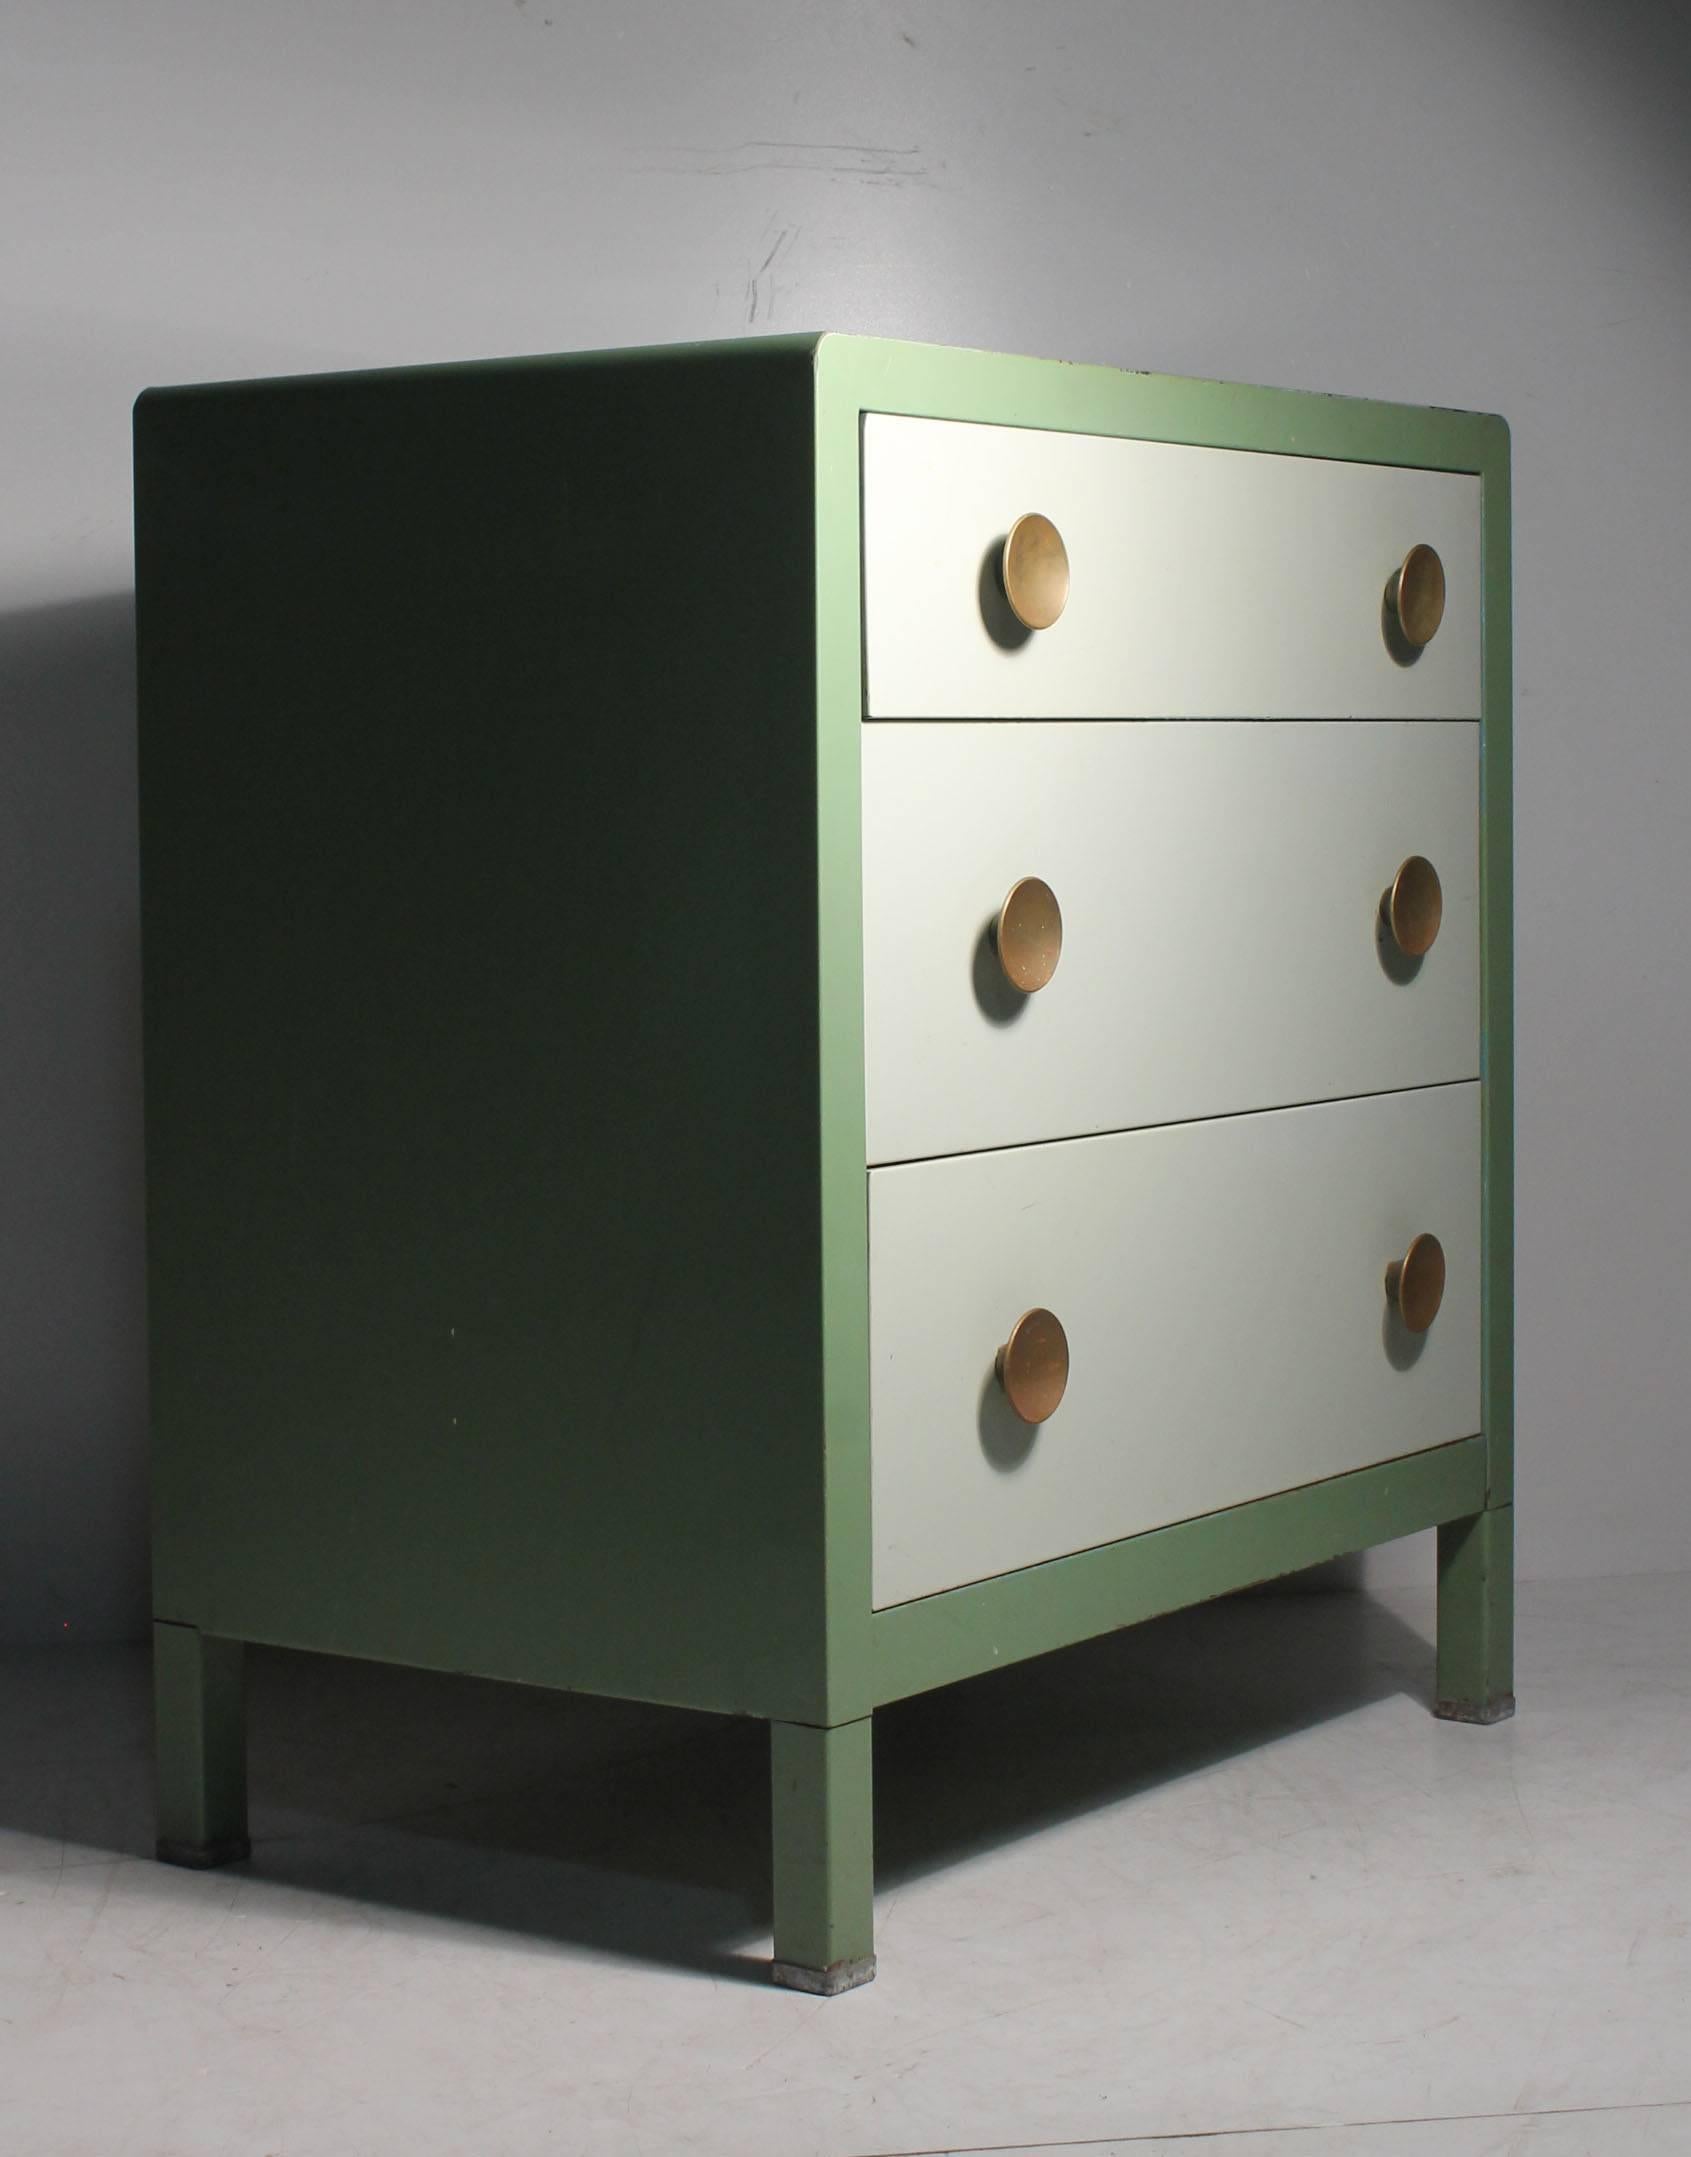 Norman Bel Geddes deco steel Industrial dresser or small buffet sideboard cabinet for a dining space. A nice early one for Simmons with label attached. Desirable smaller boutique size and proportions. Designers will brush steel these cabinets for an